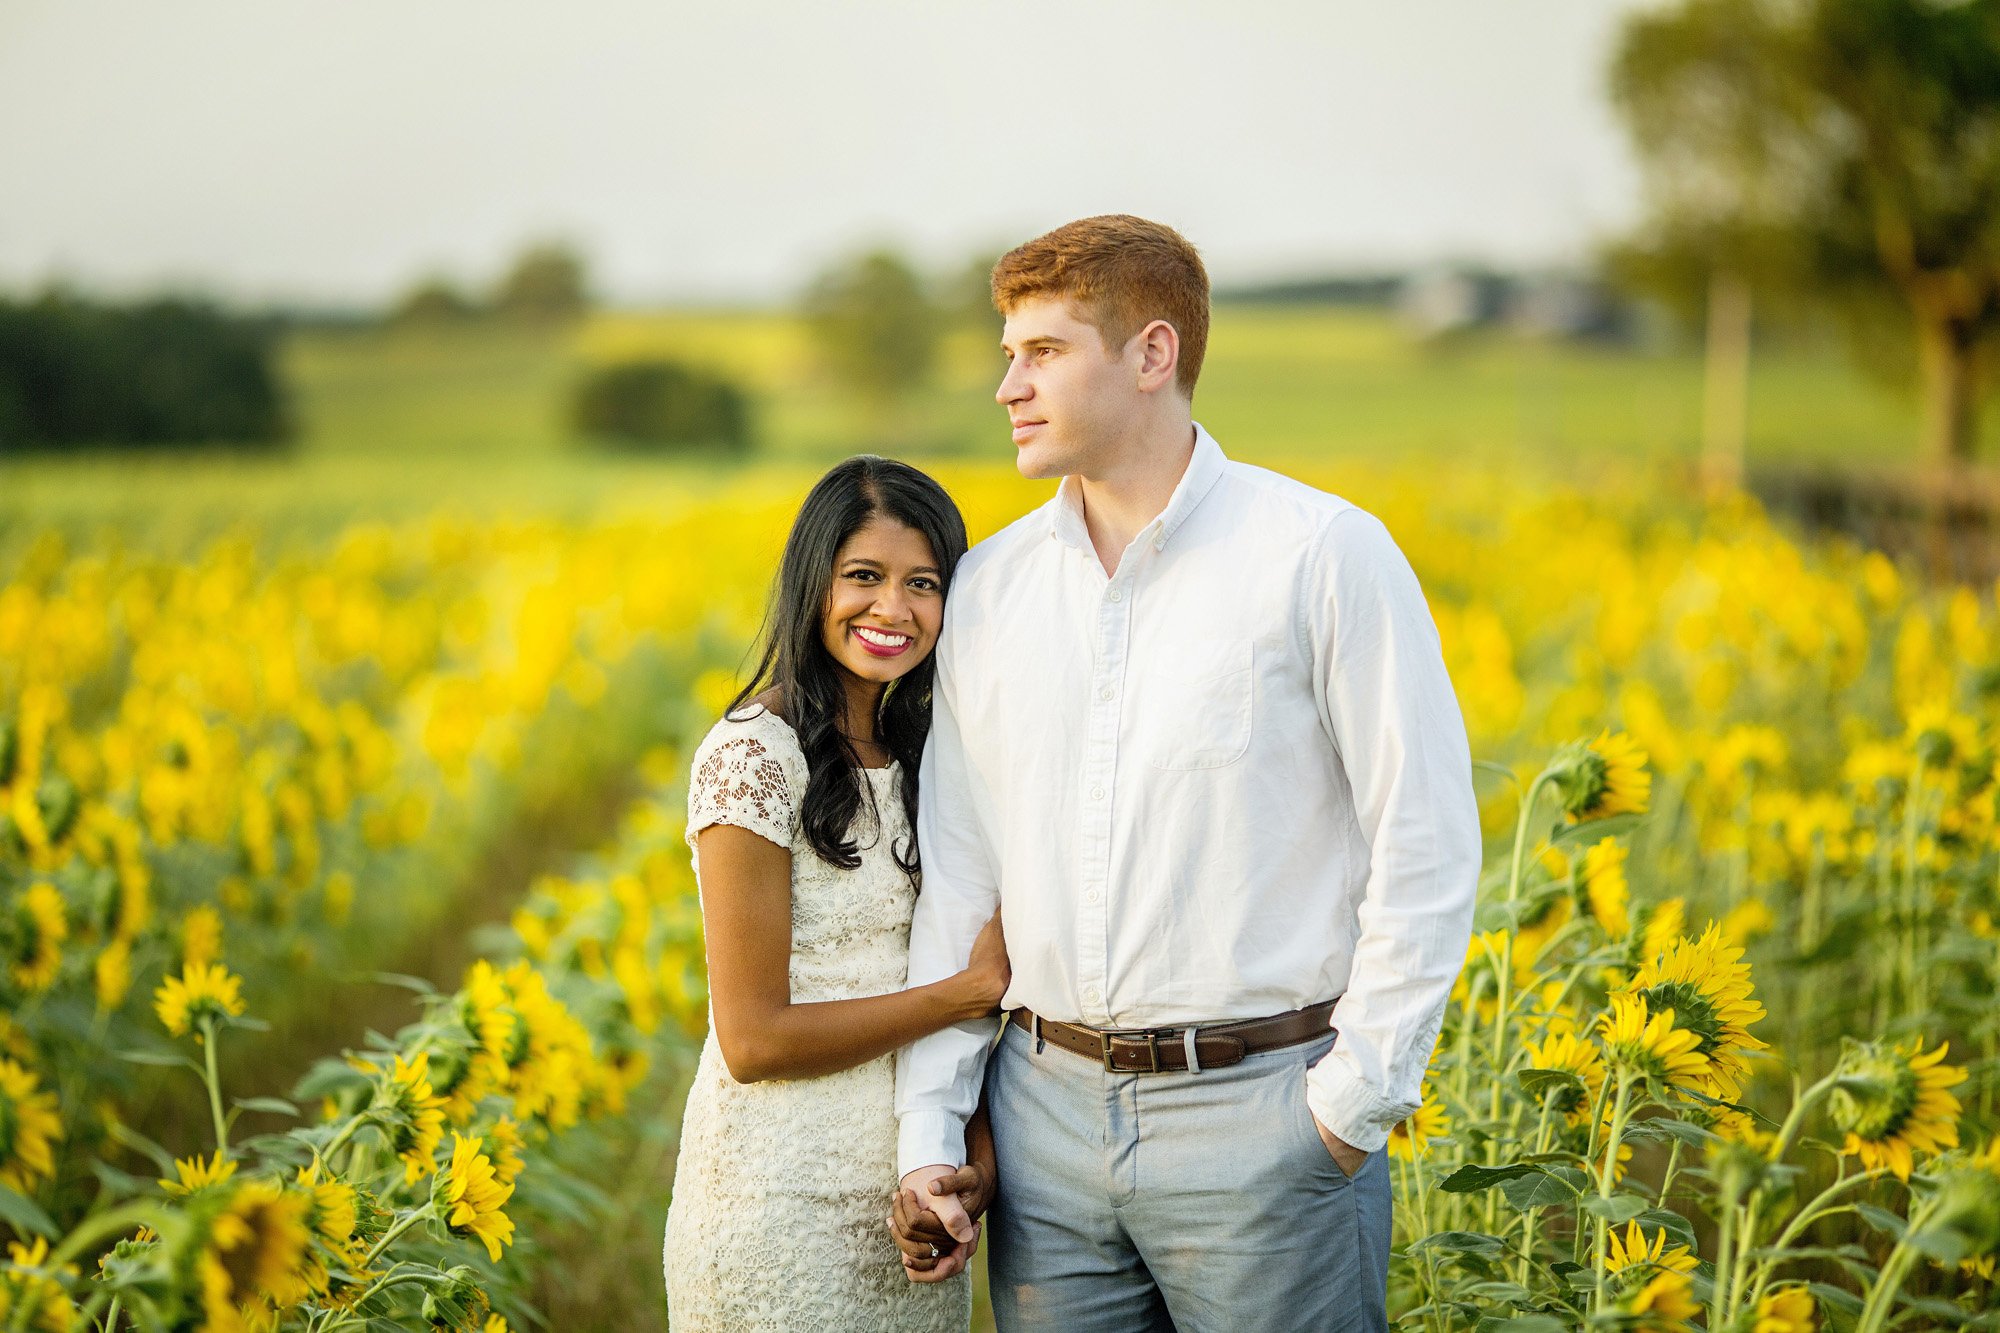 Seriously_Sabrina_Photography_Lexington_Midway_Kentucky_Engagement_Merefield_Sunflowers_Naz_and_Drew10.jpg